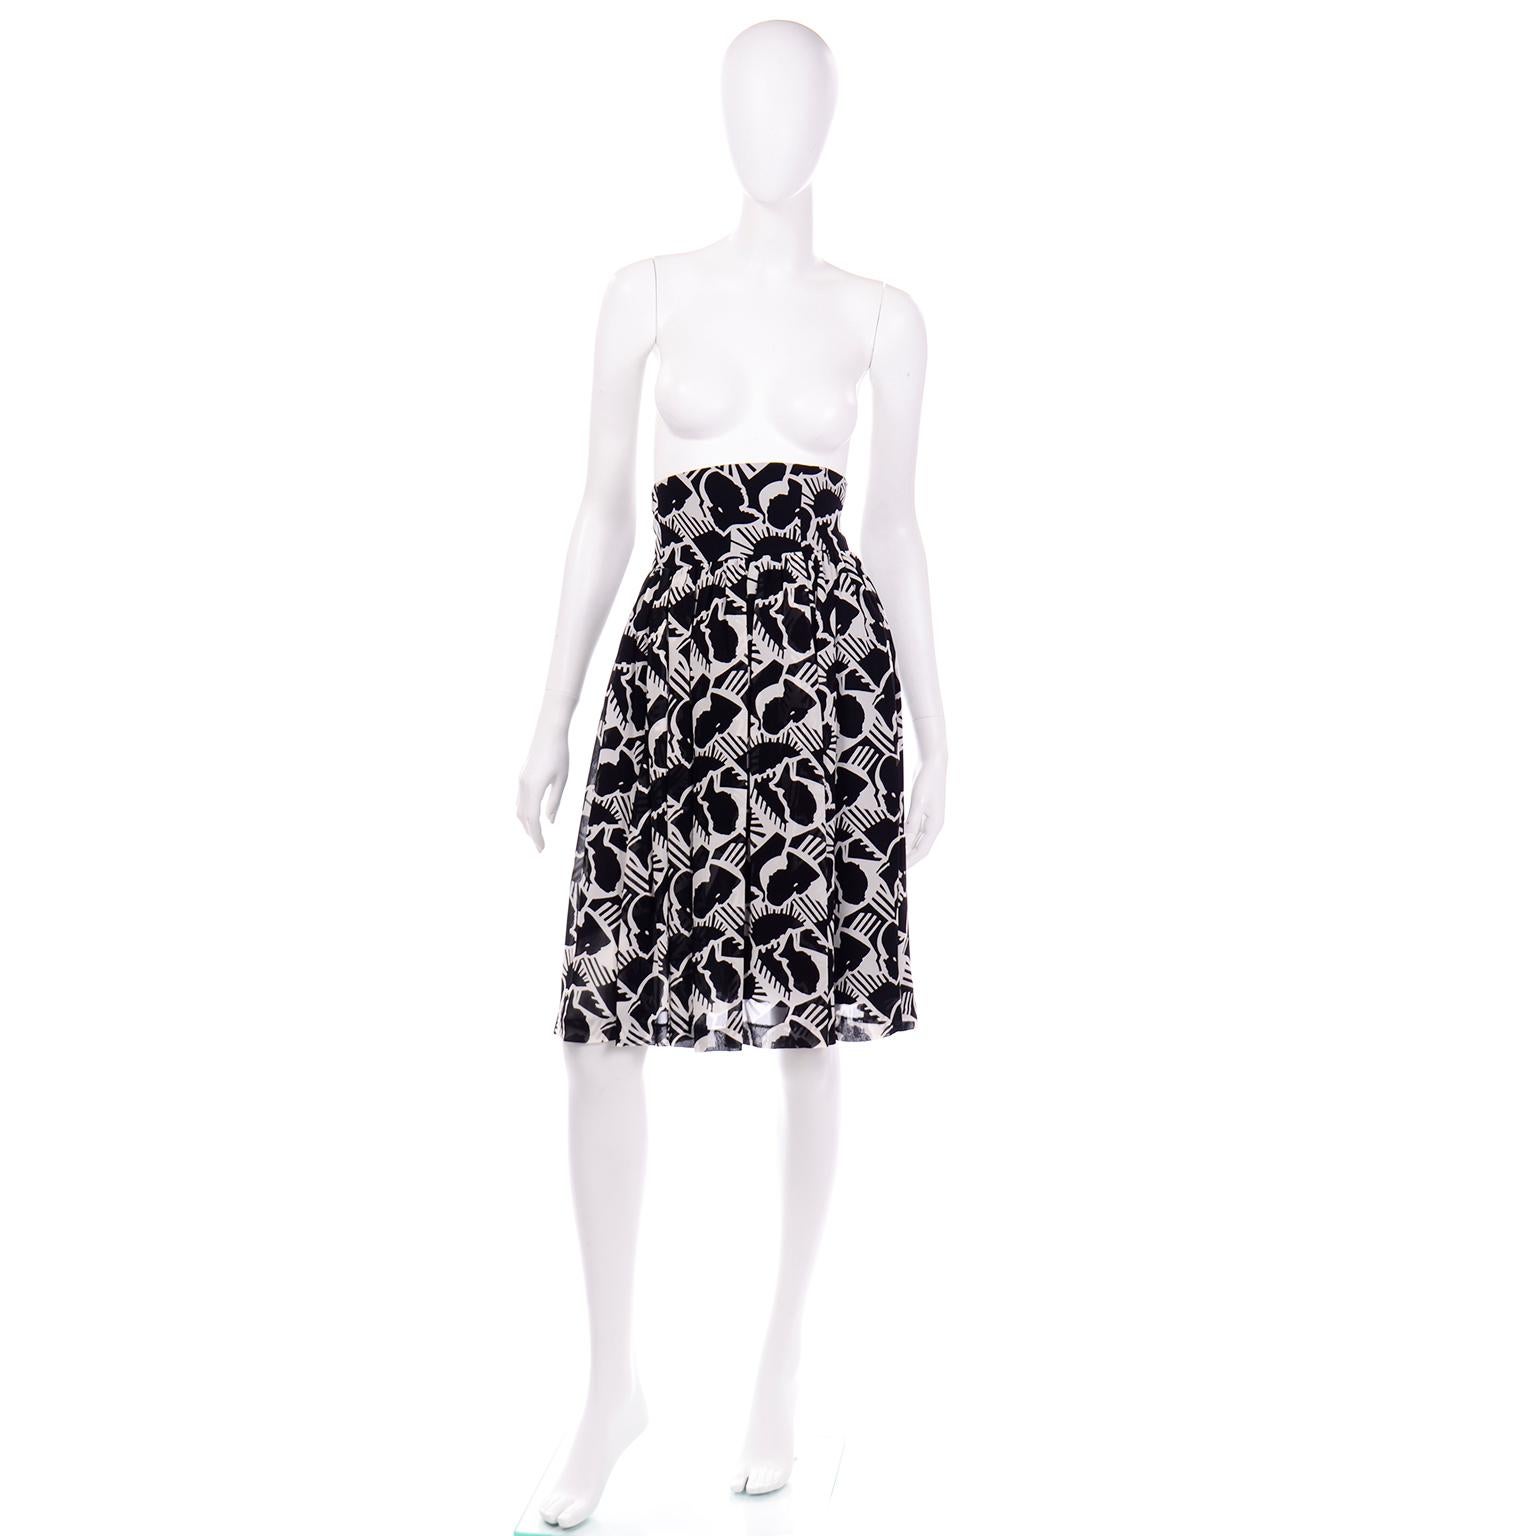 This is a rare, iconic vintage Karl Lagerfeld novelty print skirt featuring silhouette images of Mr. Lagerfeld himself! Leave it to Karl Lagerfeld to create this tongue and cheek self portrait print in black and white with abstract black lines and